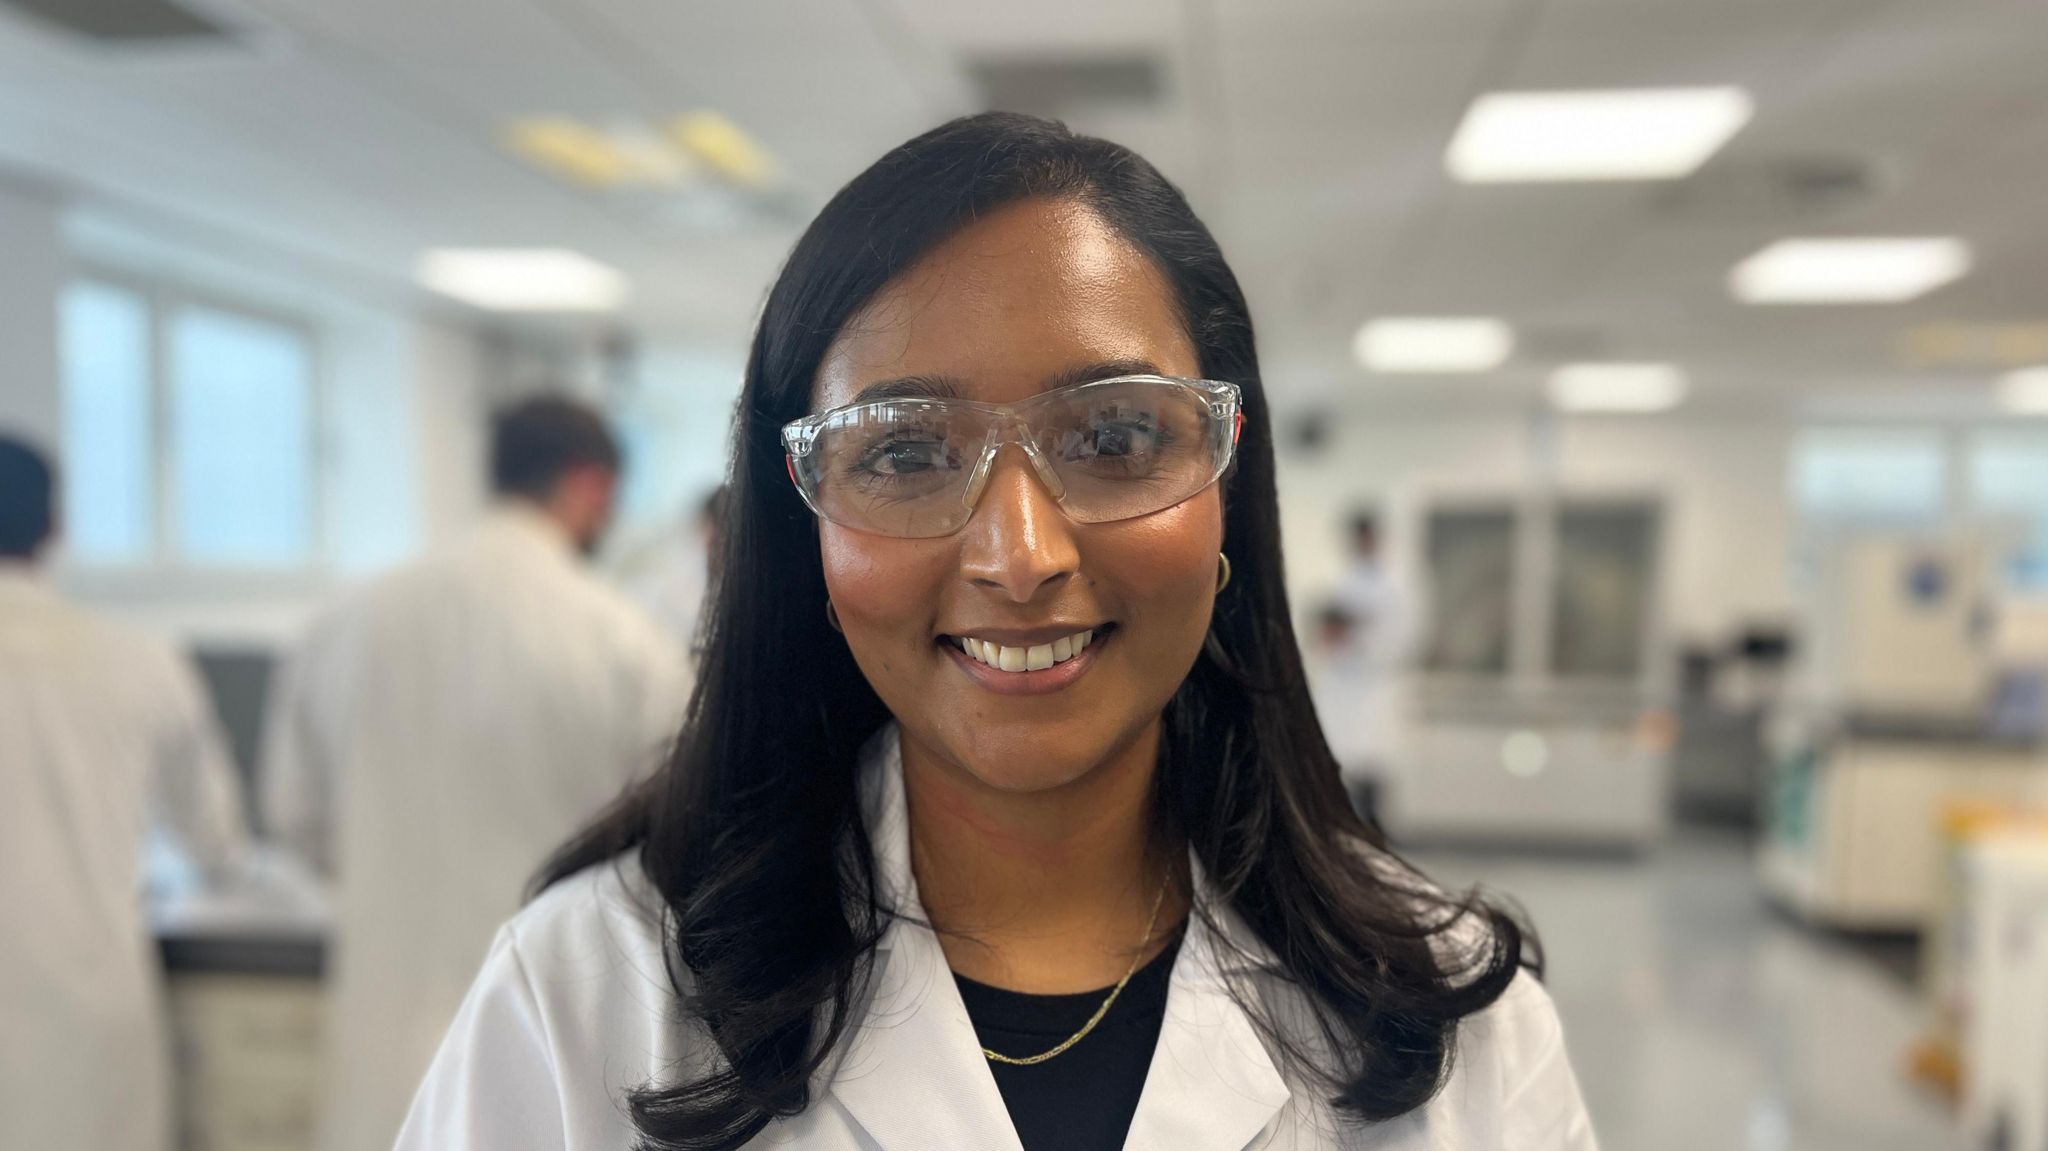 Sabrina tbc wearing a white lab jacket and safety glasses looking toward the camera